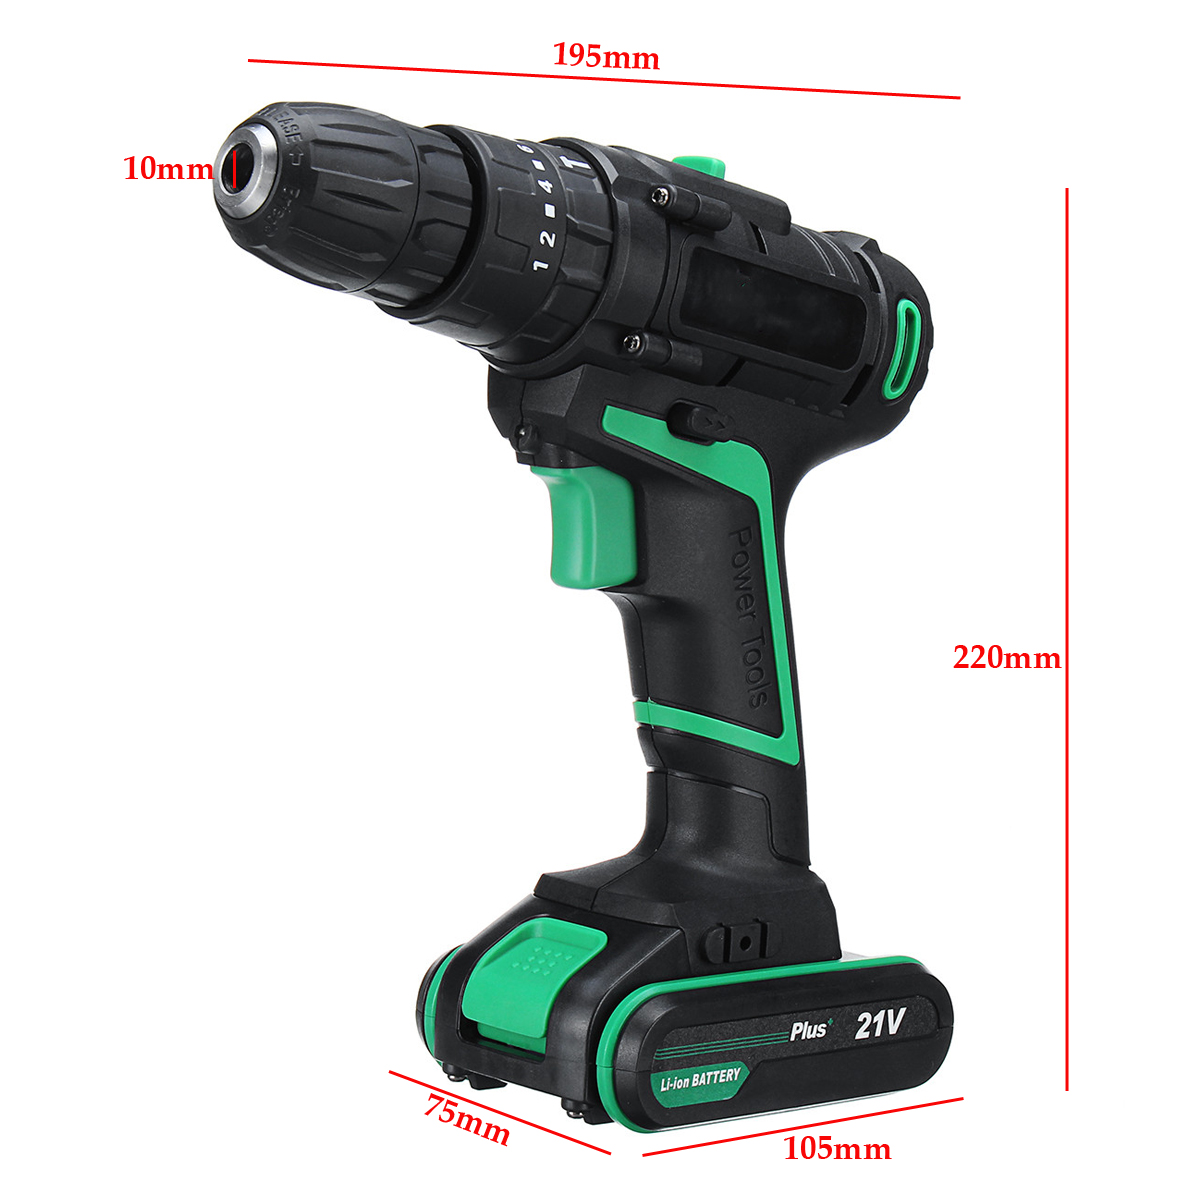 21V-Multi-function-Electric-Screwdriver-Rechargeable-Cordless-Power-Drilling-Tools-Power-Drills-1376917-9